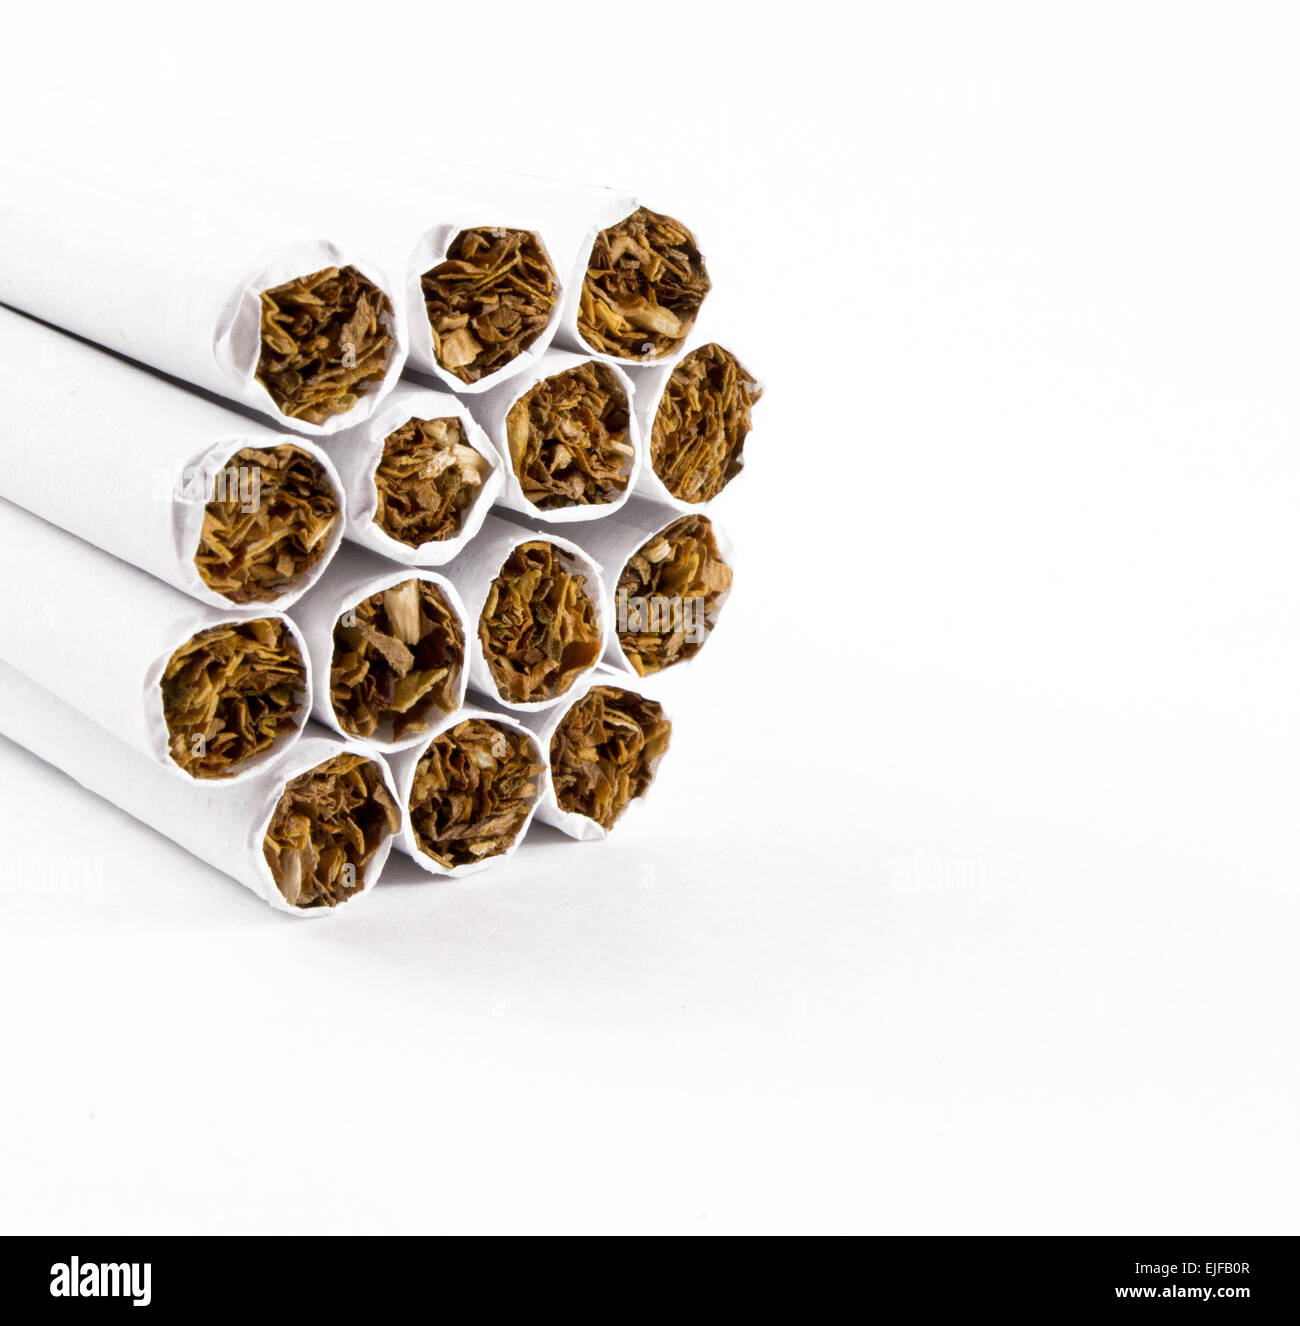 Unlit cigarette ends bunched together ready for igniting Stock Photo